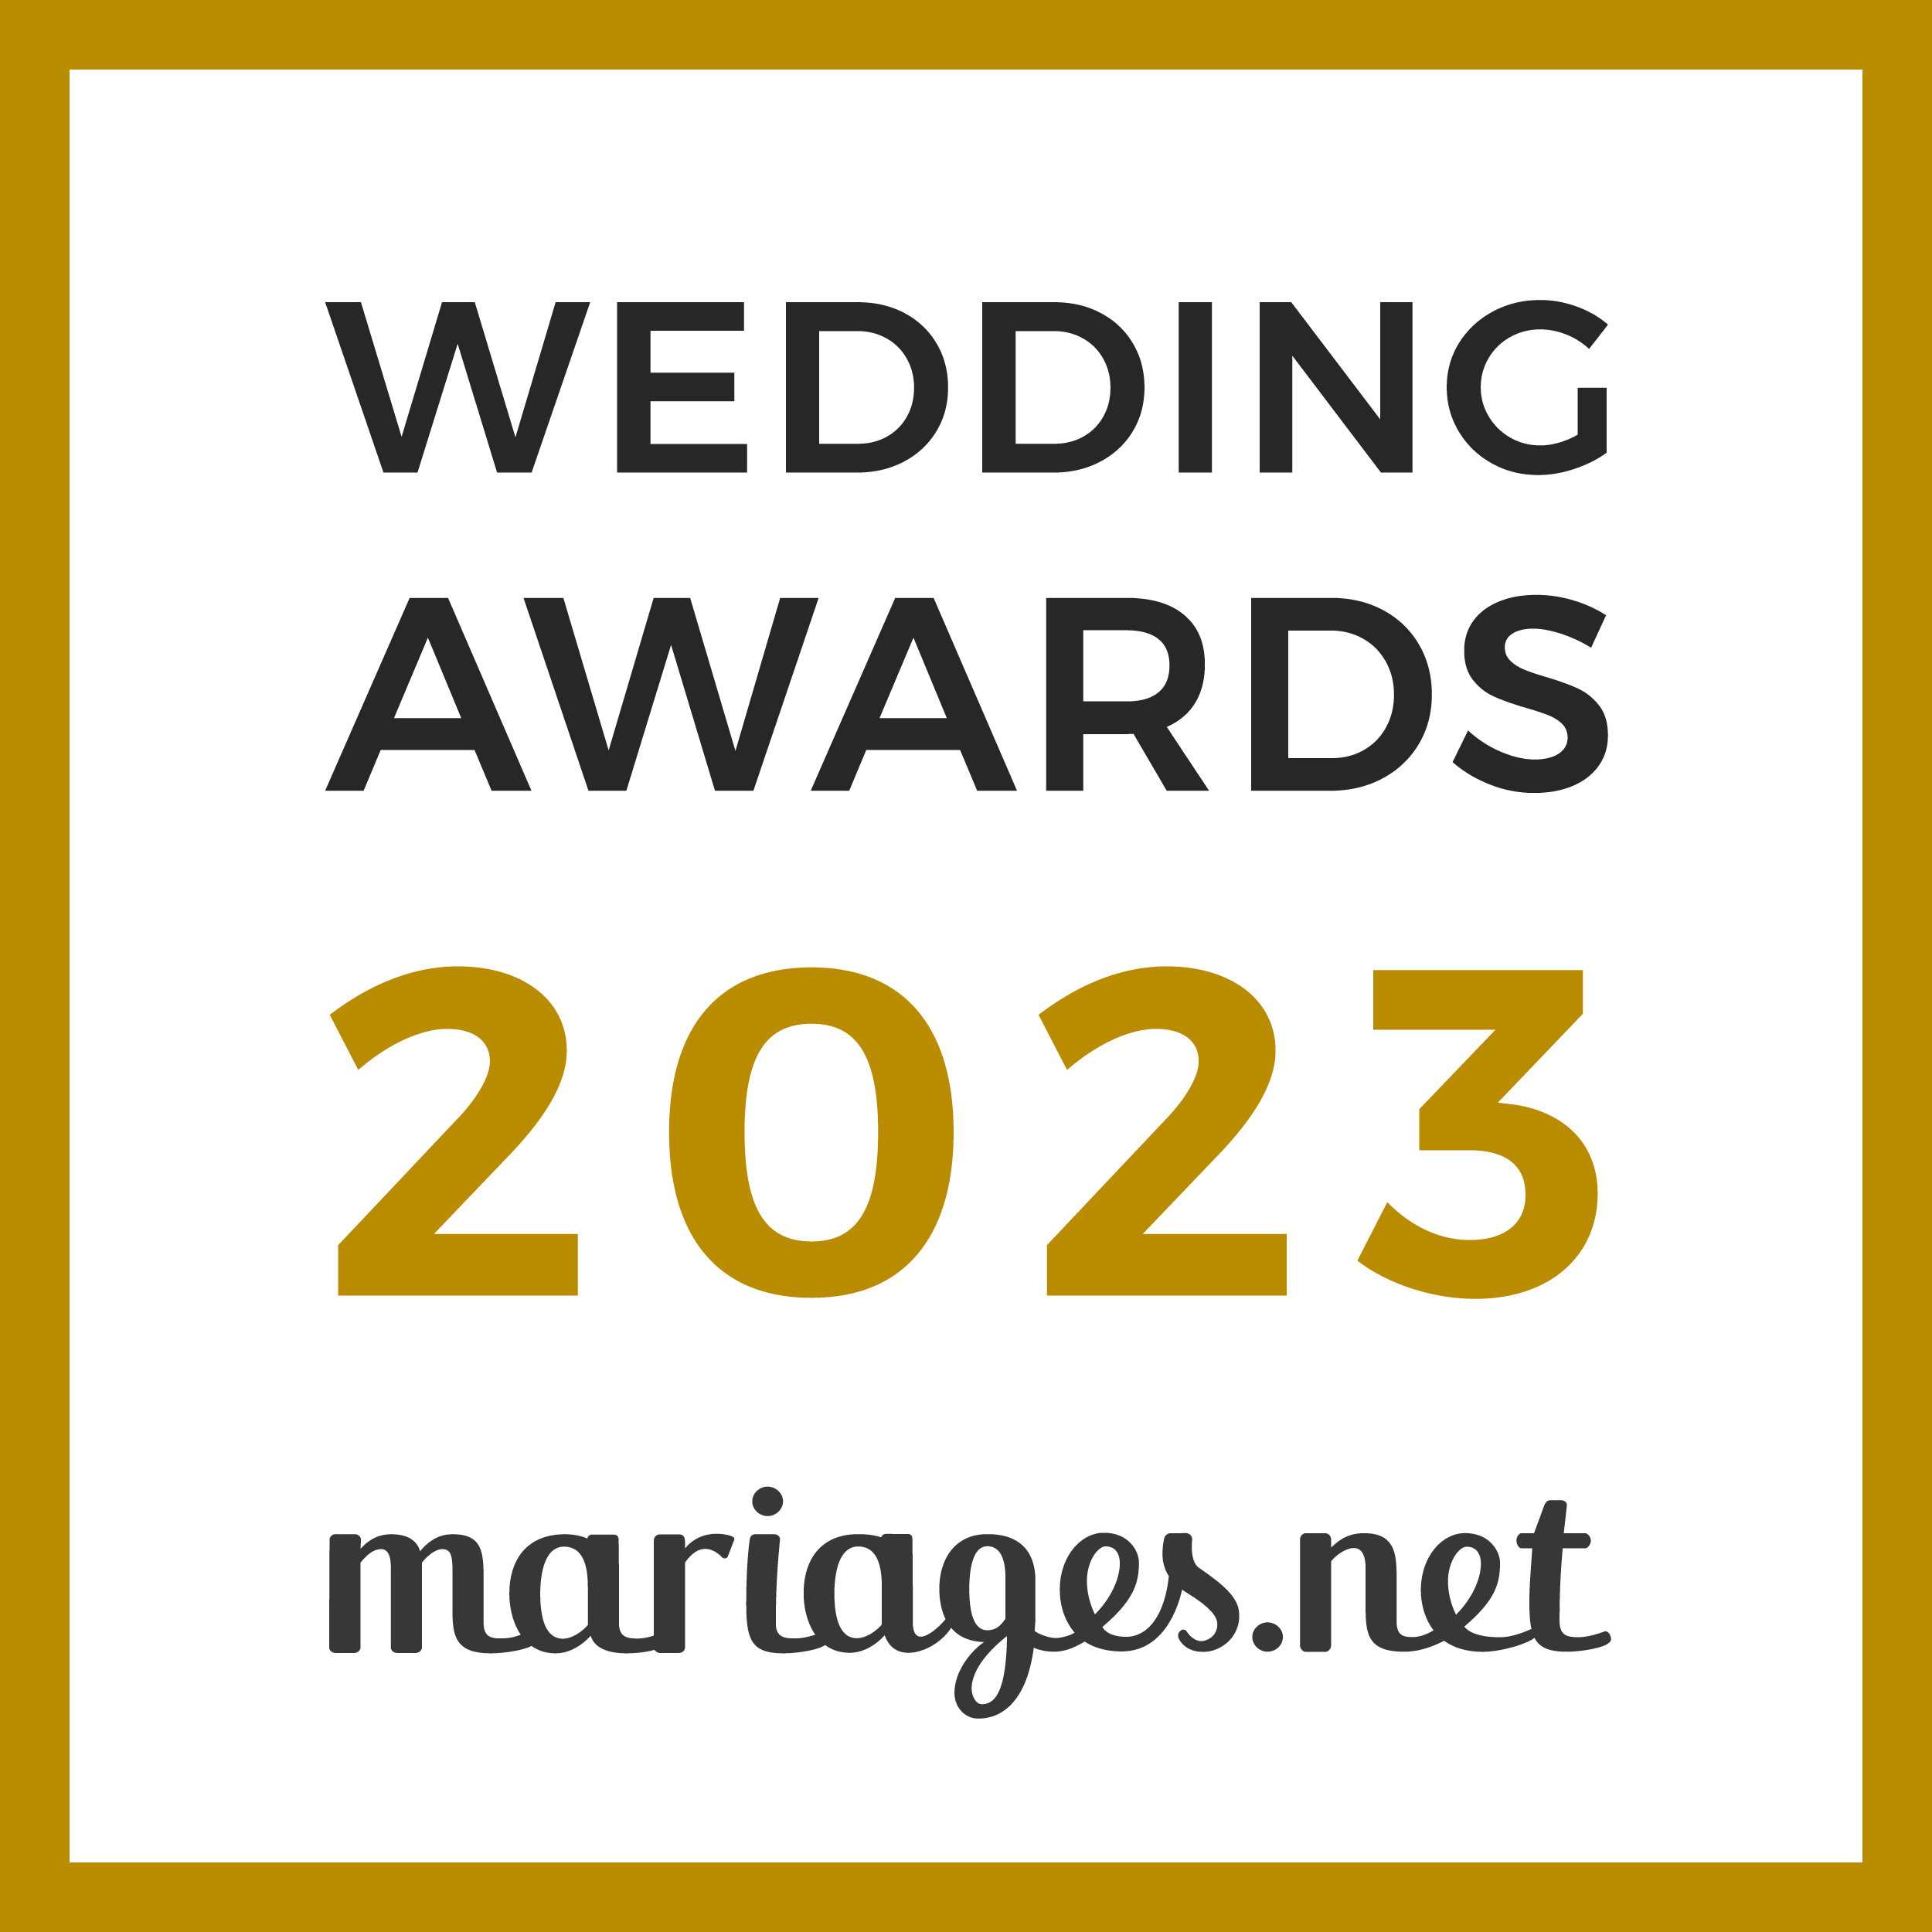 Oui Création Mariage, gagnant Wedding Awards 2023 Mariages.net